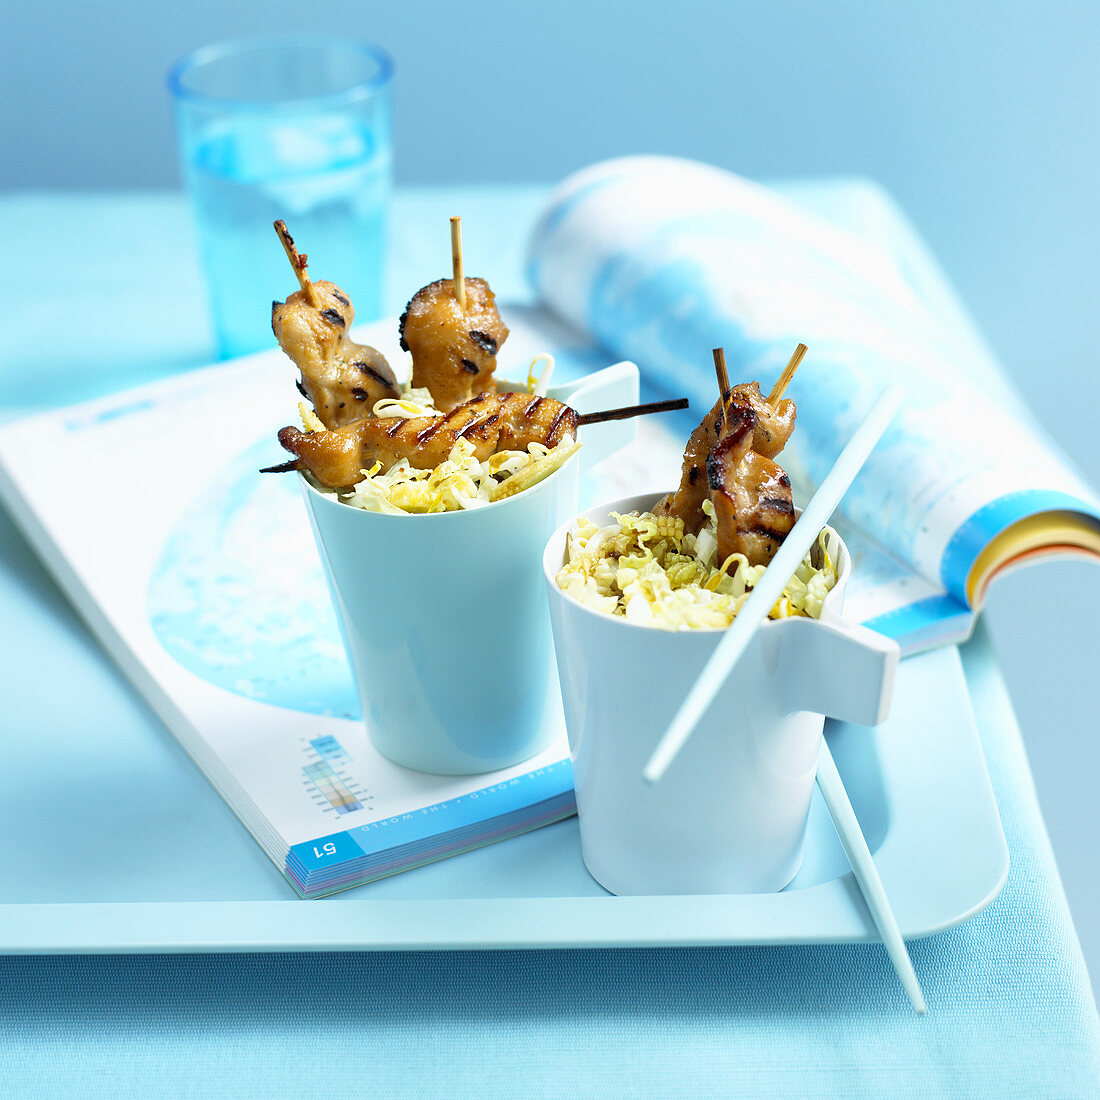 Skewered chicken with Chinese cabbage salad in beakers